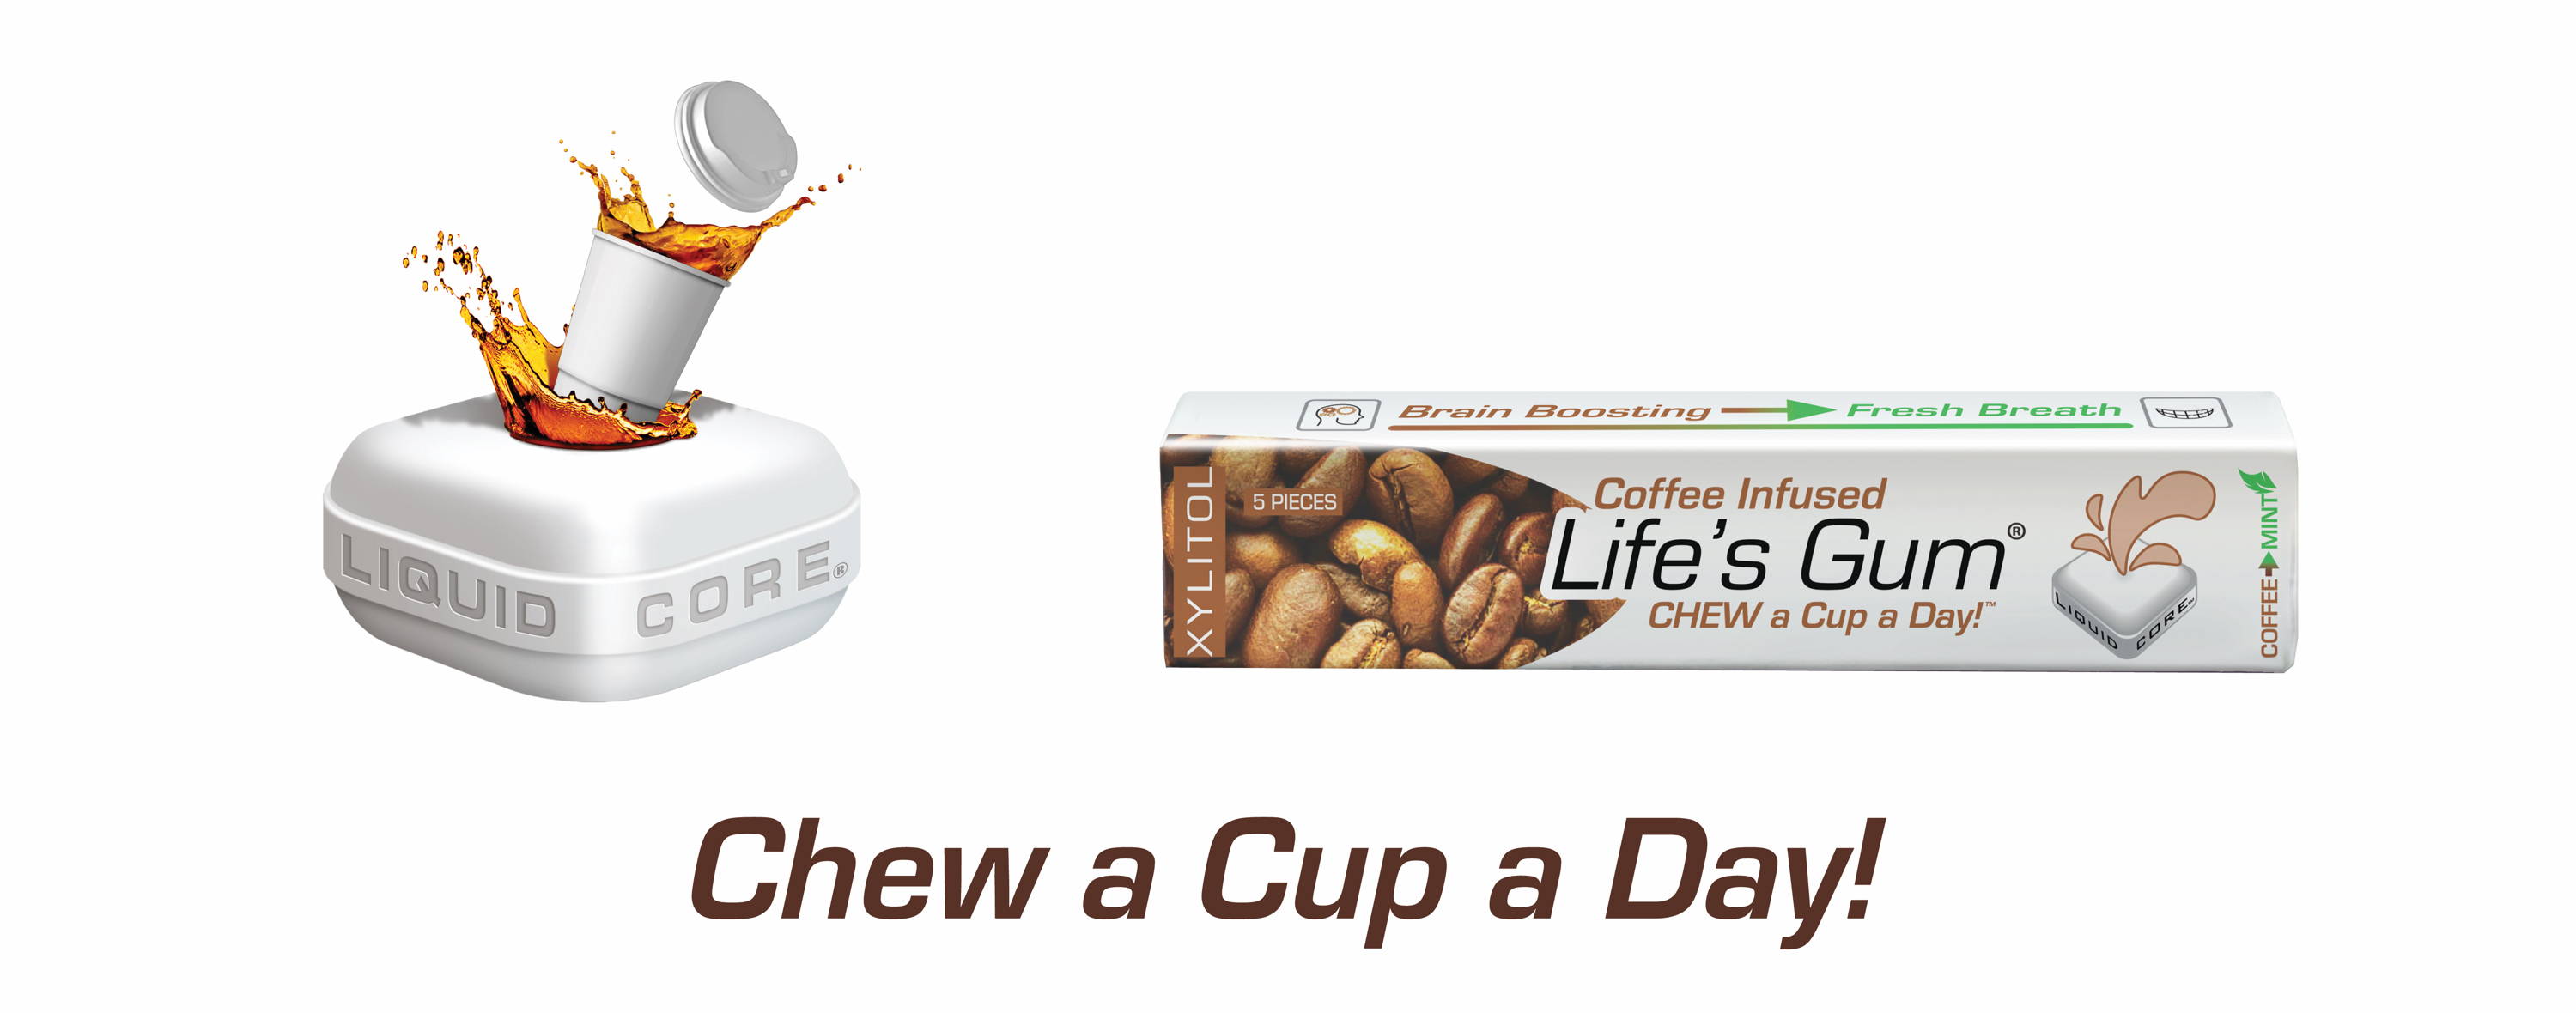 Life's Gum Coffee Infused Chewing Gum